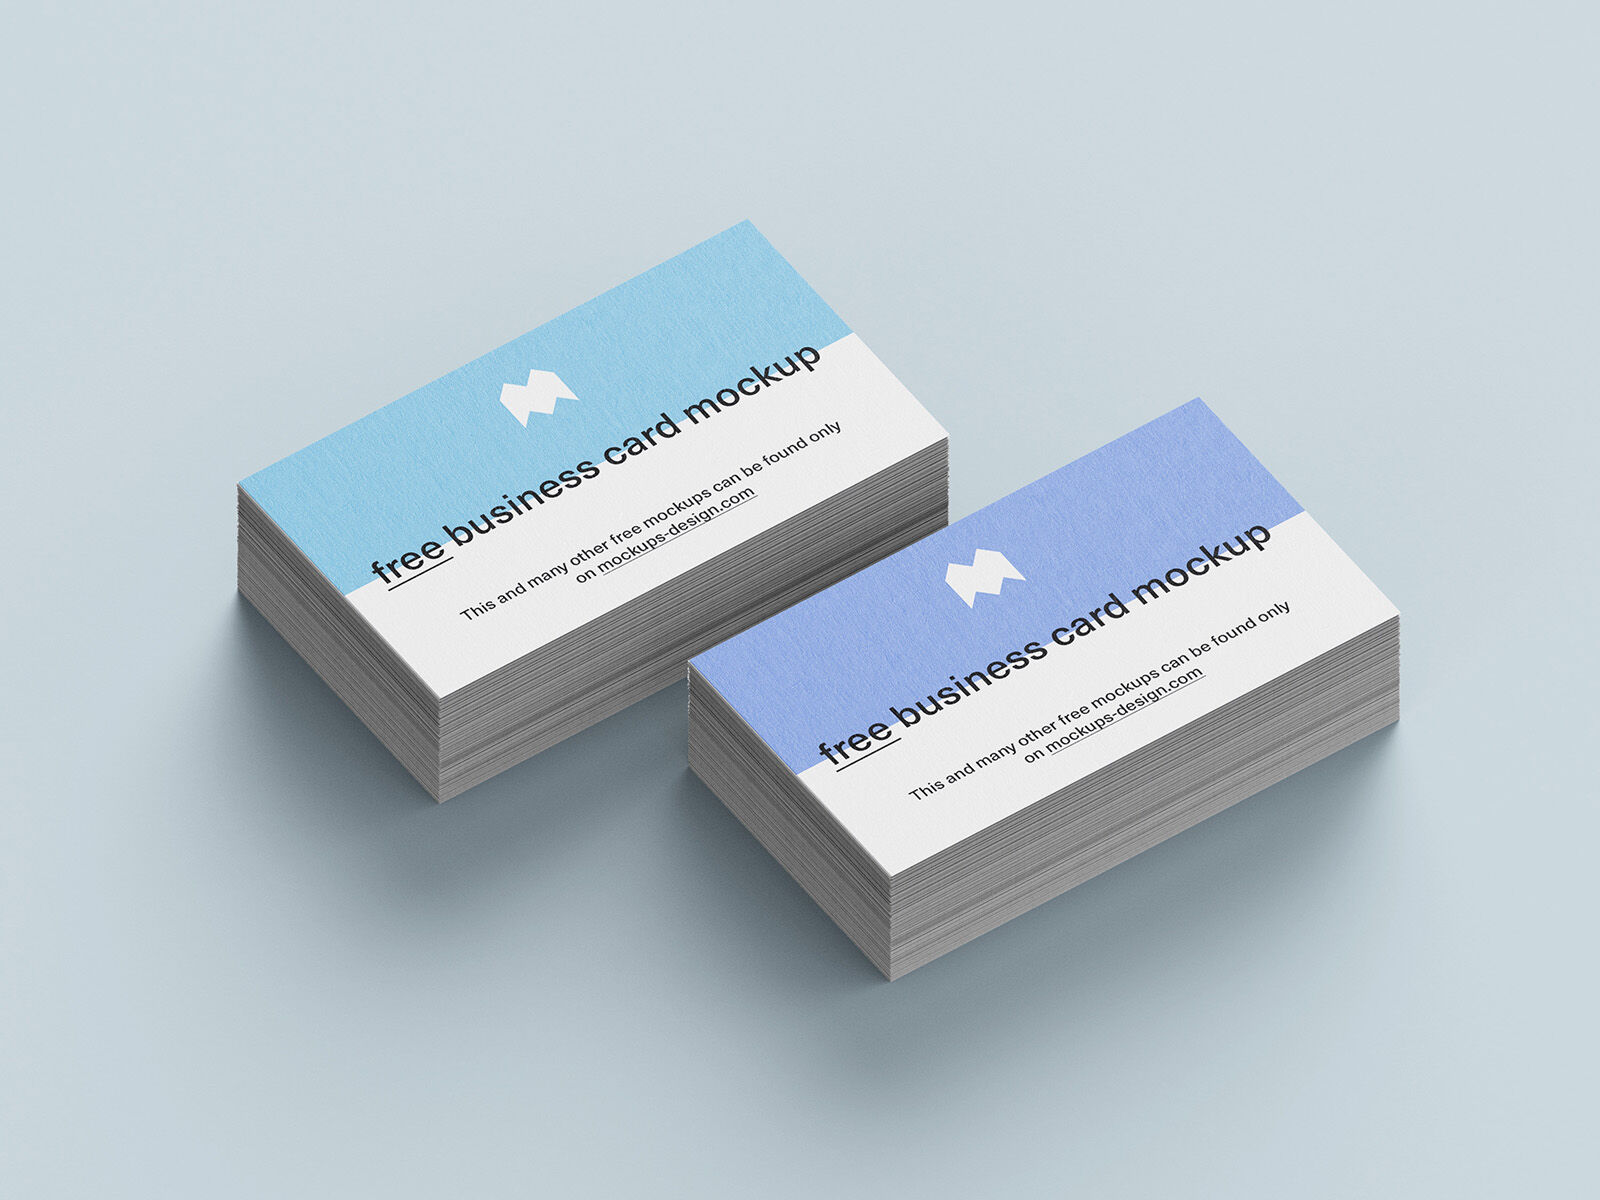 7 Perspective Business Card Grids and Stacks Mockups FREE PSD